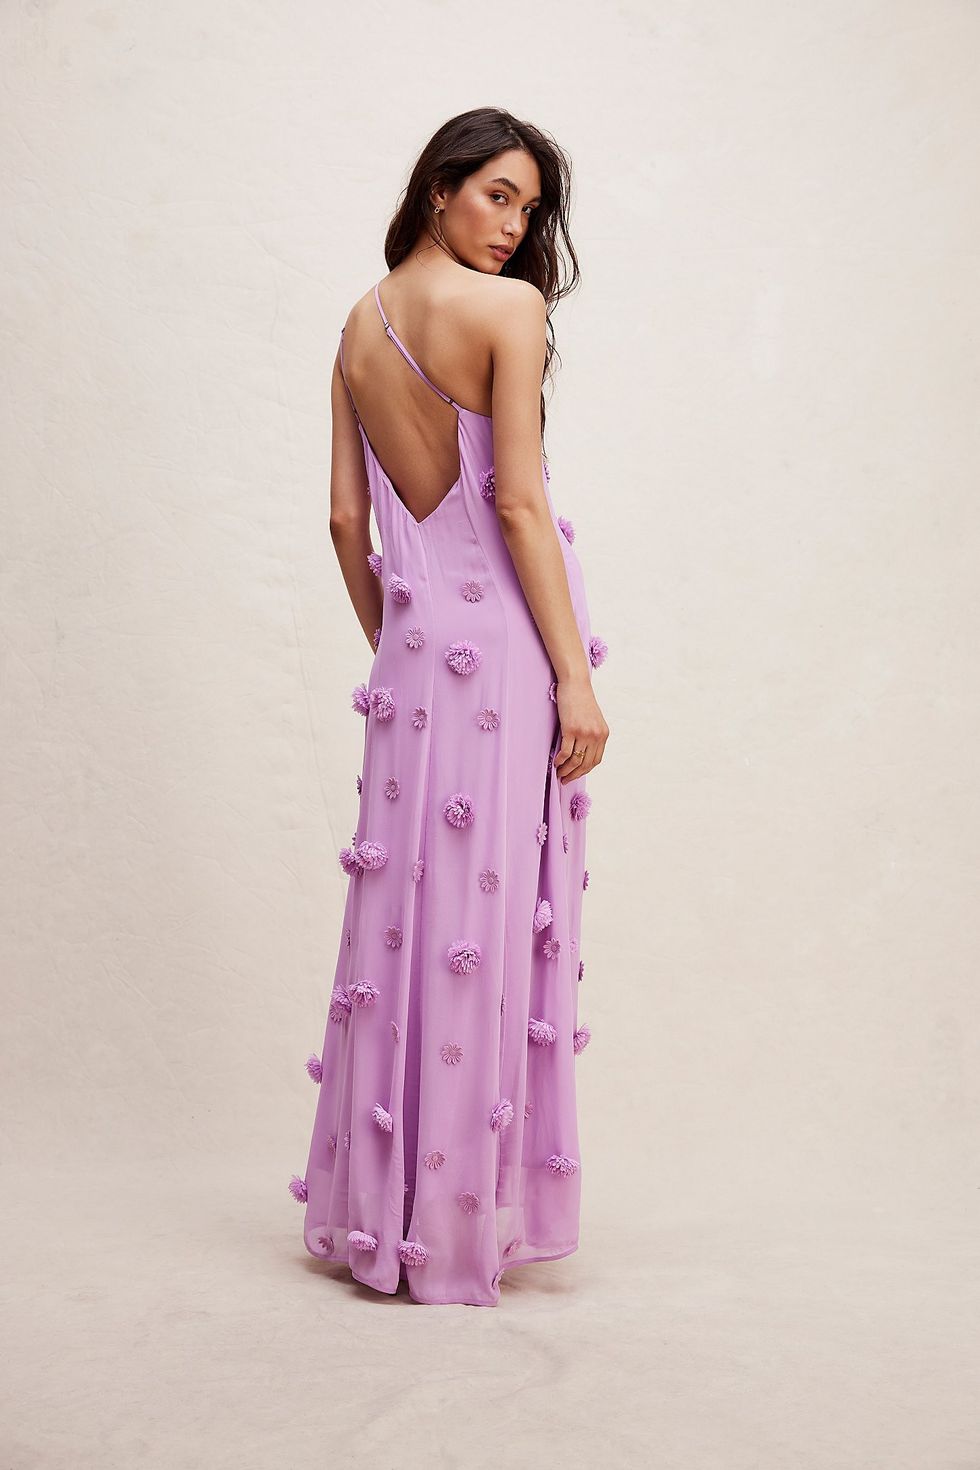 Free People Blossom Bliss Maxi ($300)